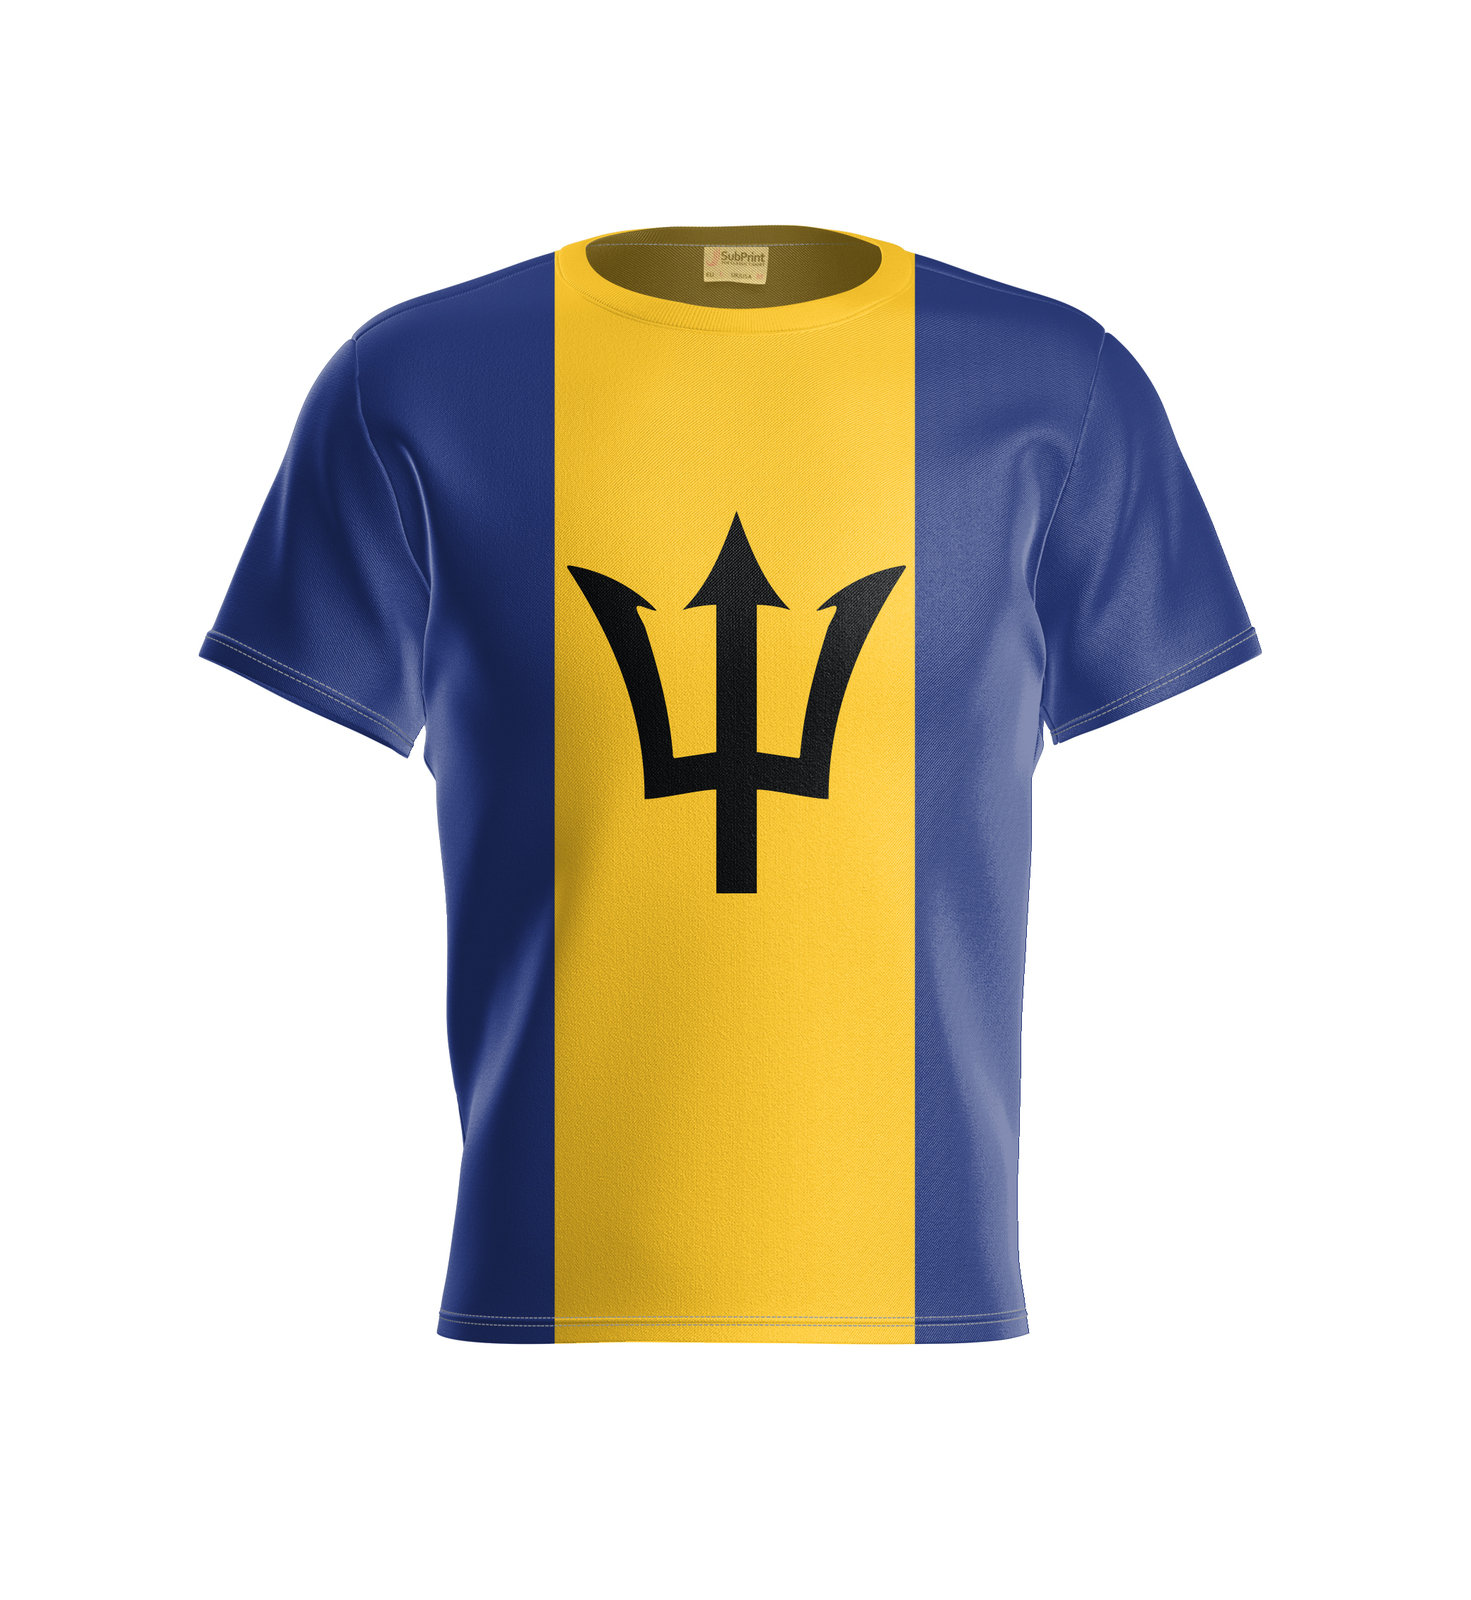 Primary image for Barbados T-shirt Proud Barbados flag Coat of Arms Barbados Sport T-Shirt Gift